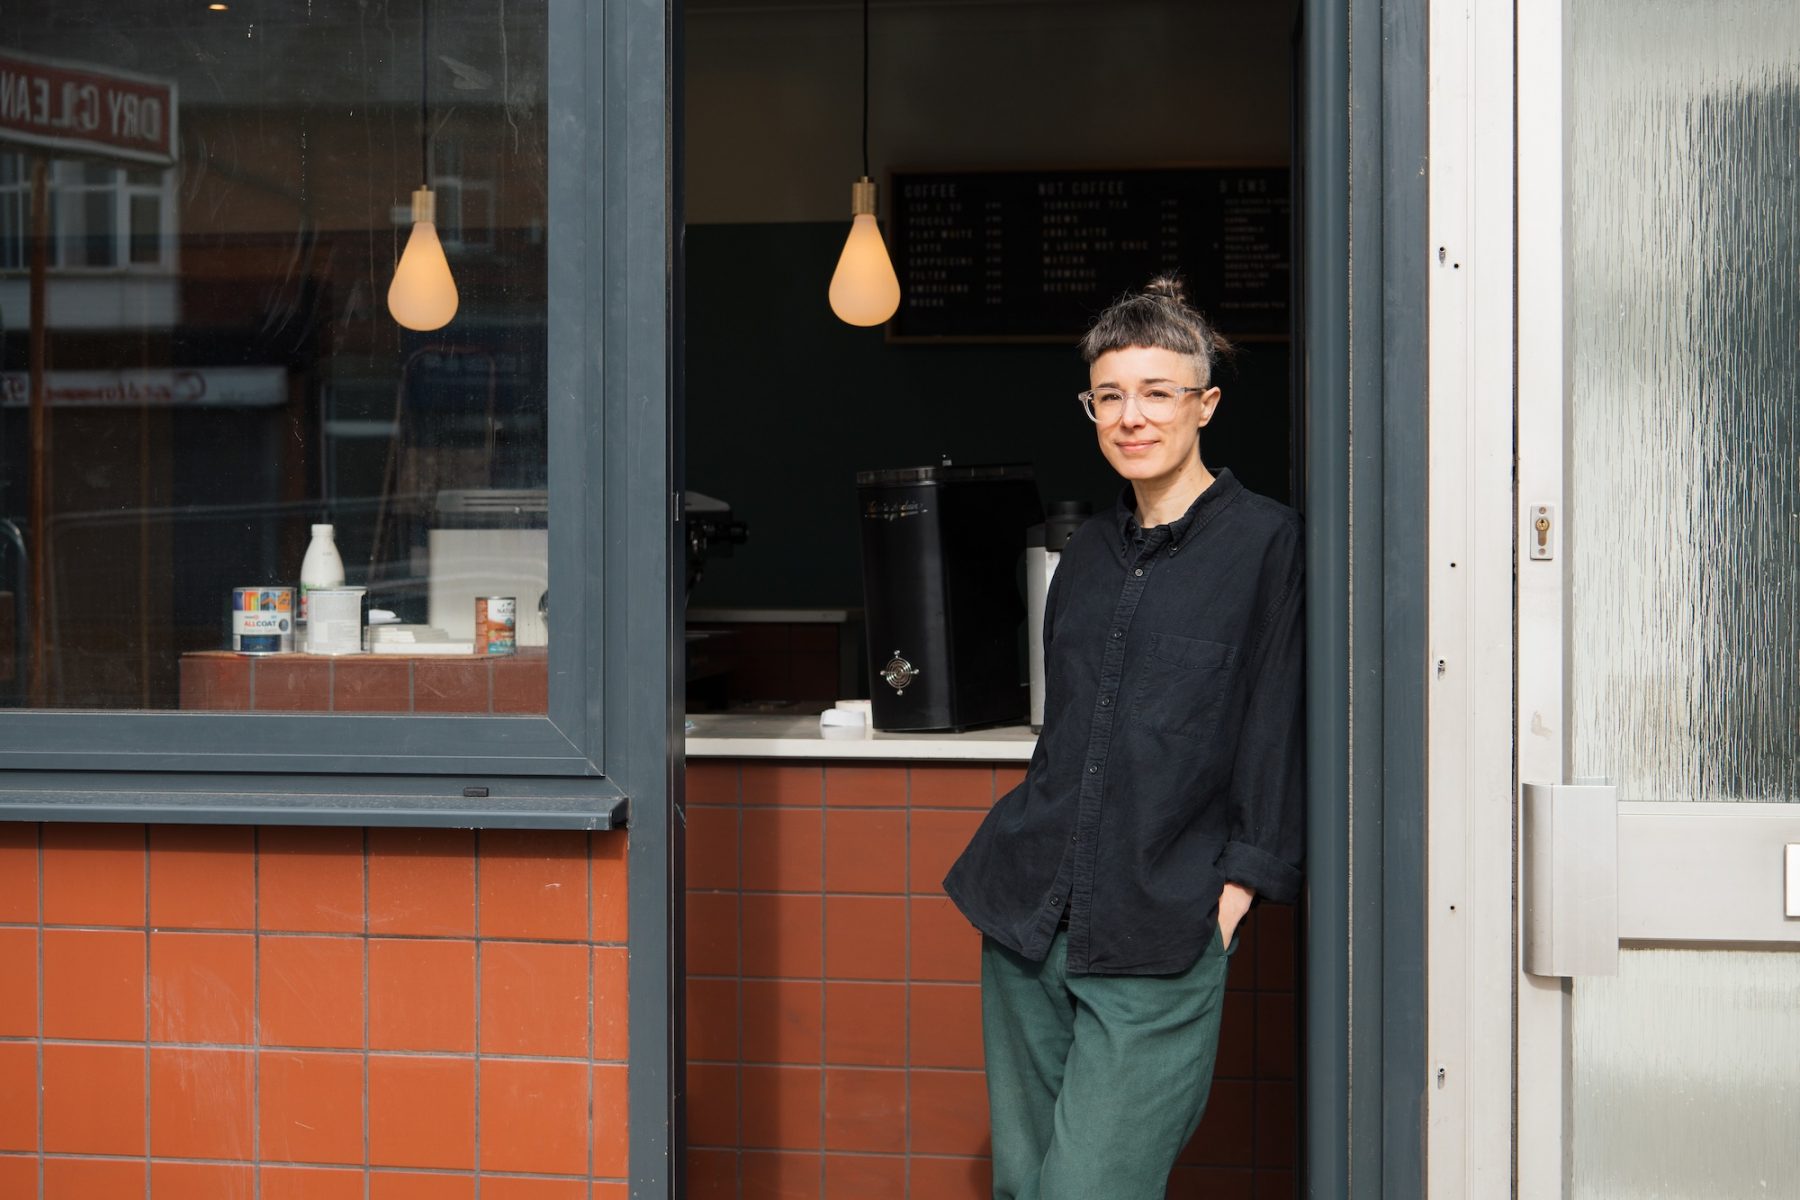 Opposite ventures into Meanwood, bringing Specialty Coffee and Sustainable Dining